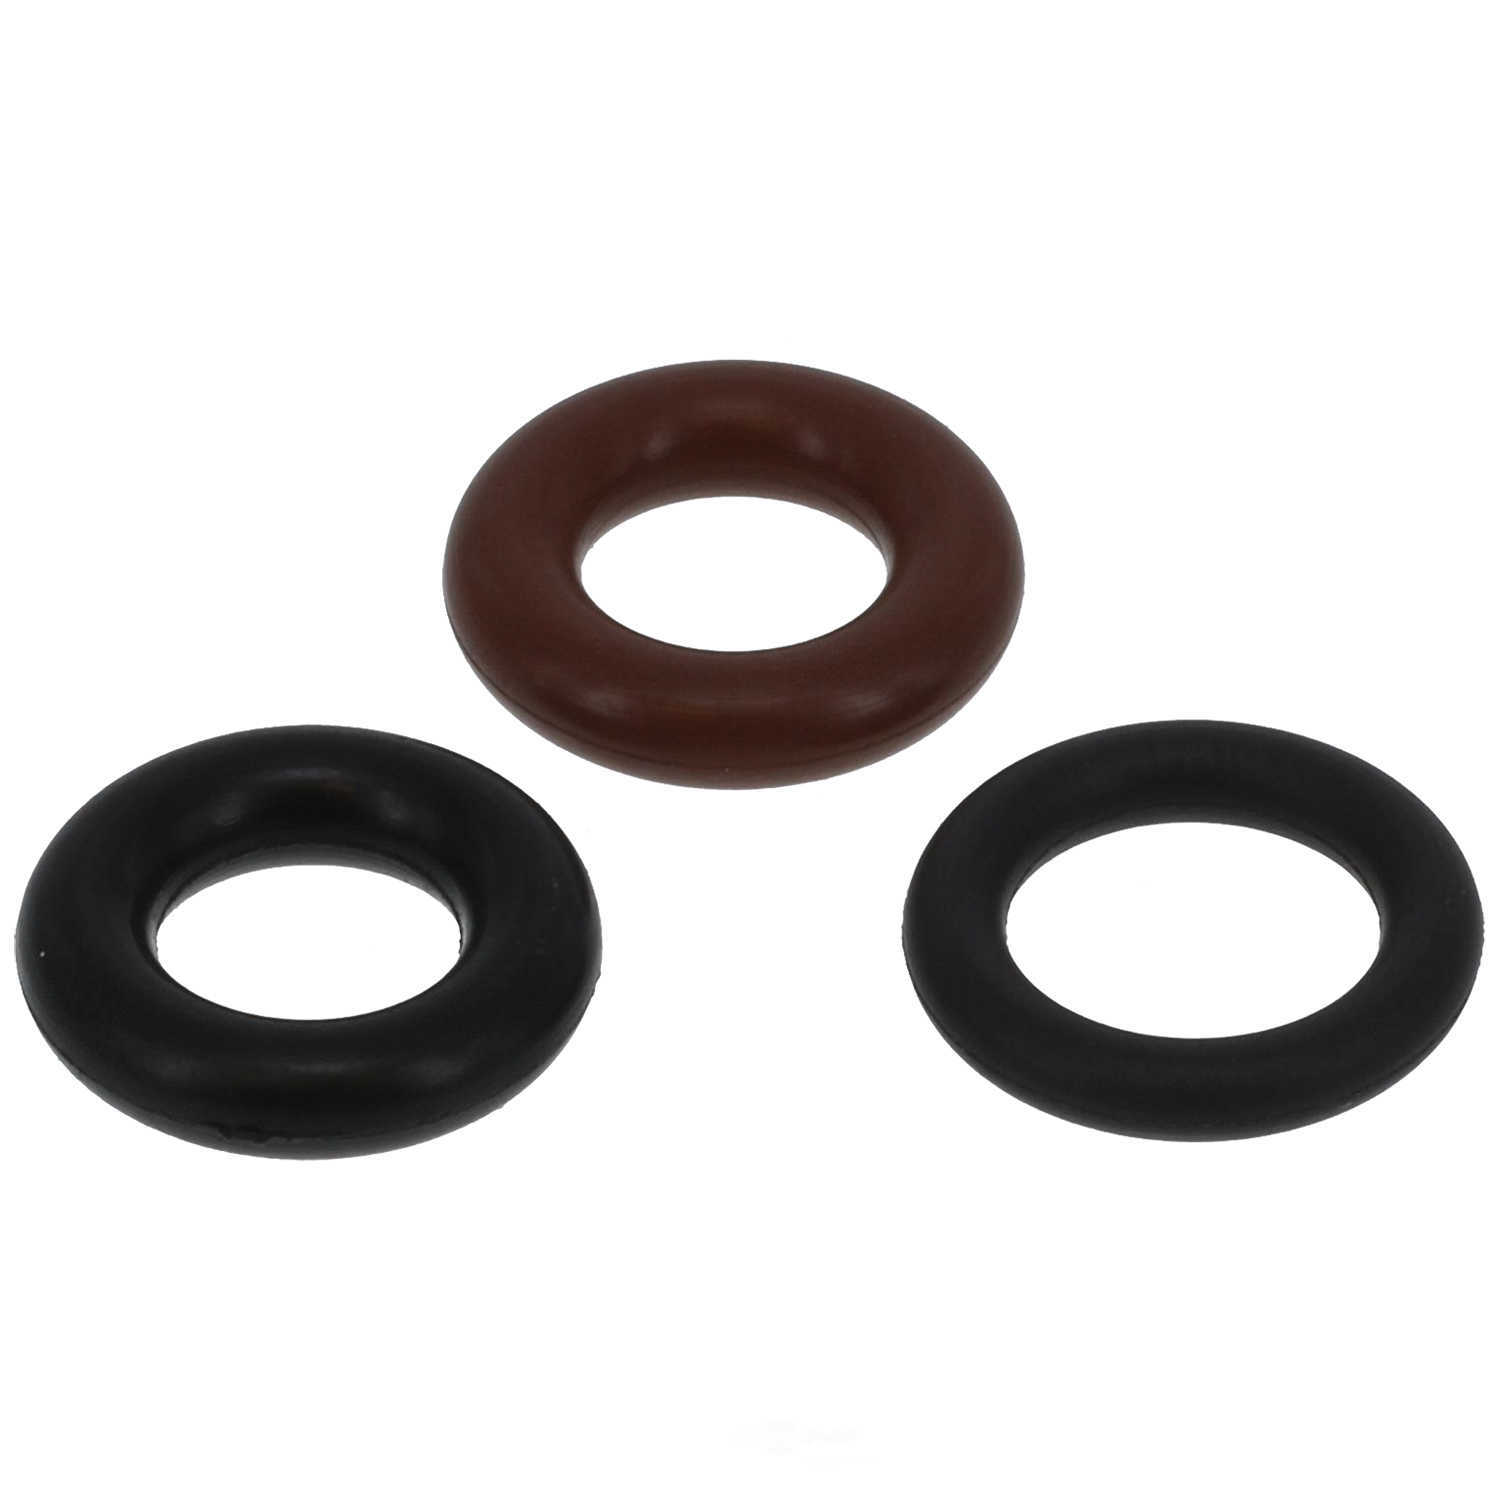 GB REMANUFACTURING INC. - Fuel Injector Seal Kit - GBR 8-017